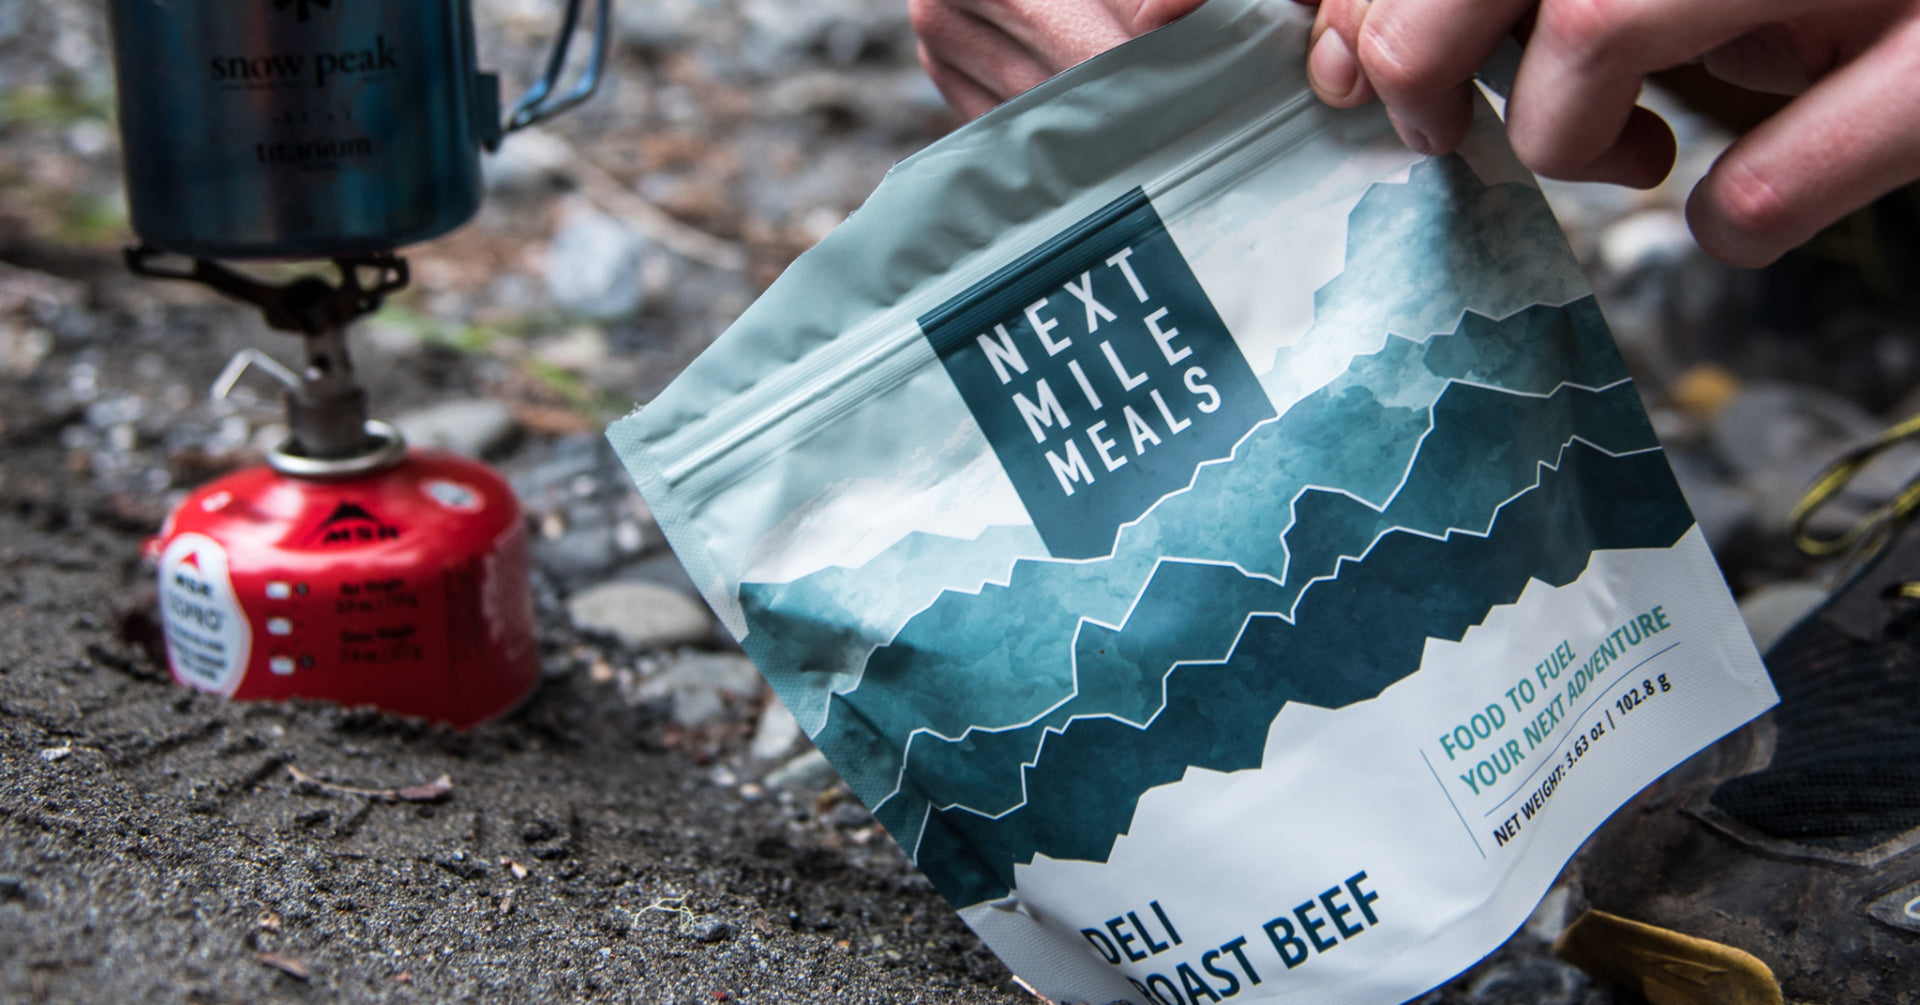 A backpacking meal being opened next to a camping stove